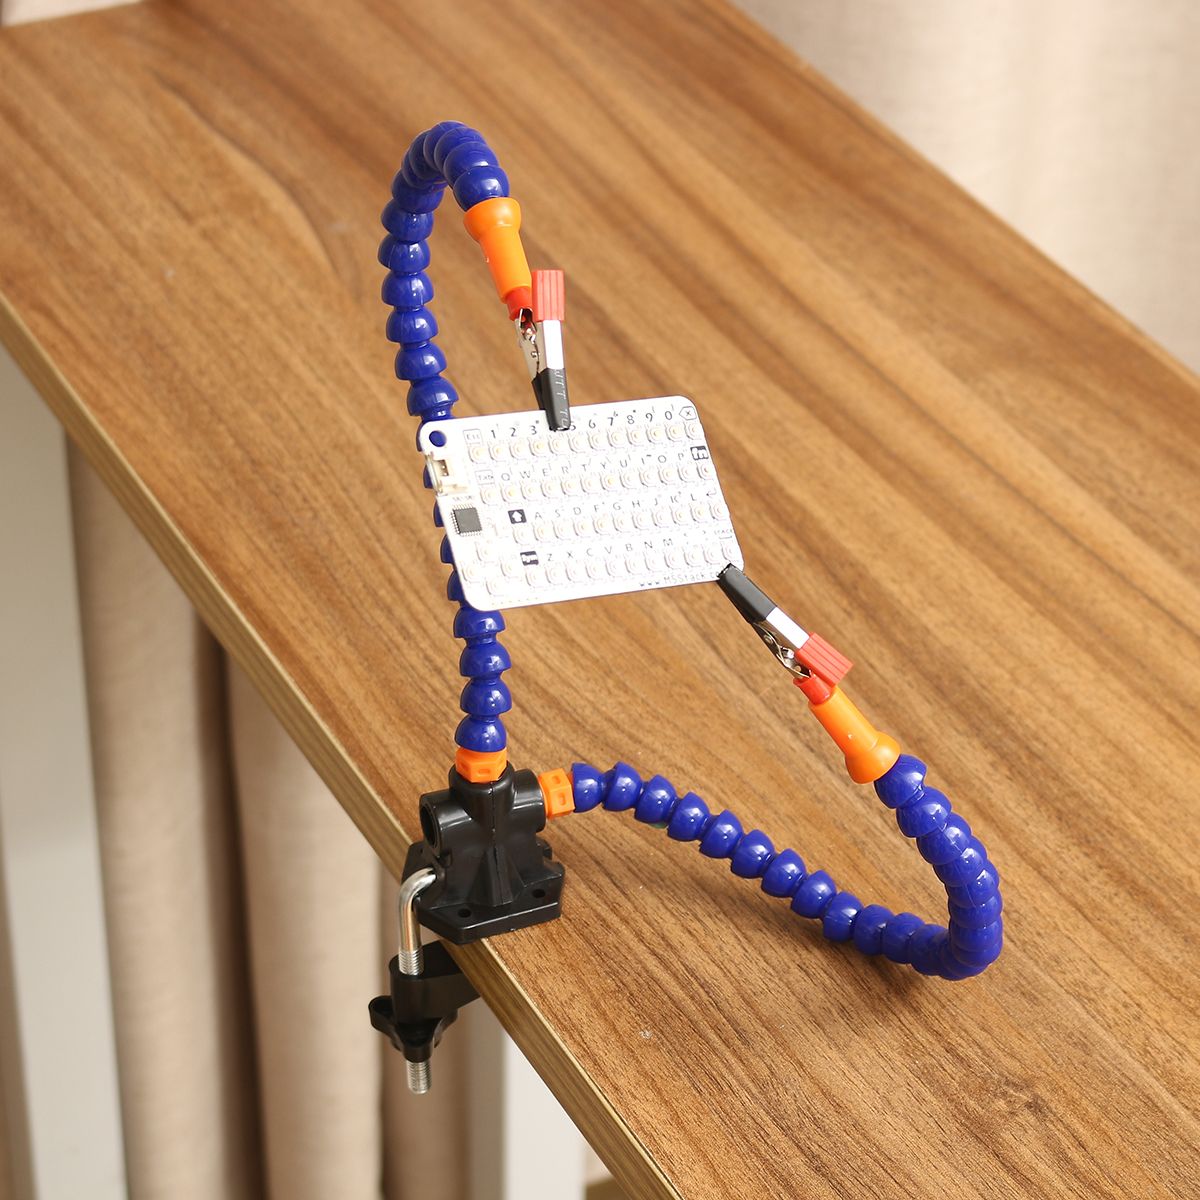 Helping-Hand-Tool-Iron-Soldering-Station-Vise-Clamp-Clip-PCB-Holder-Flexible-Arm-1660284